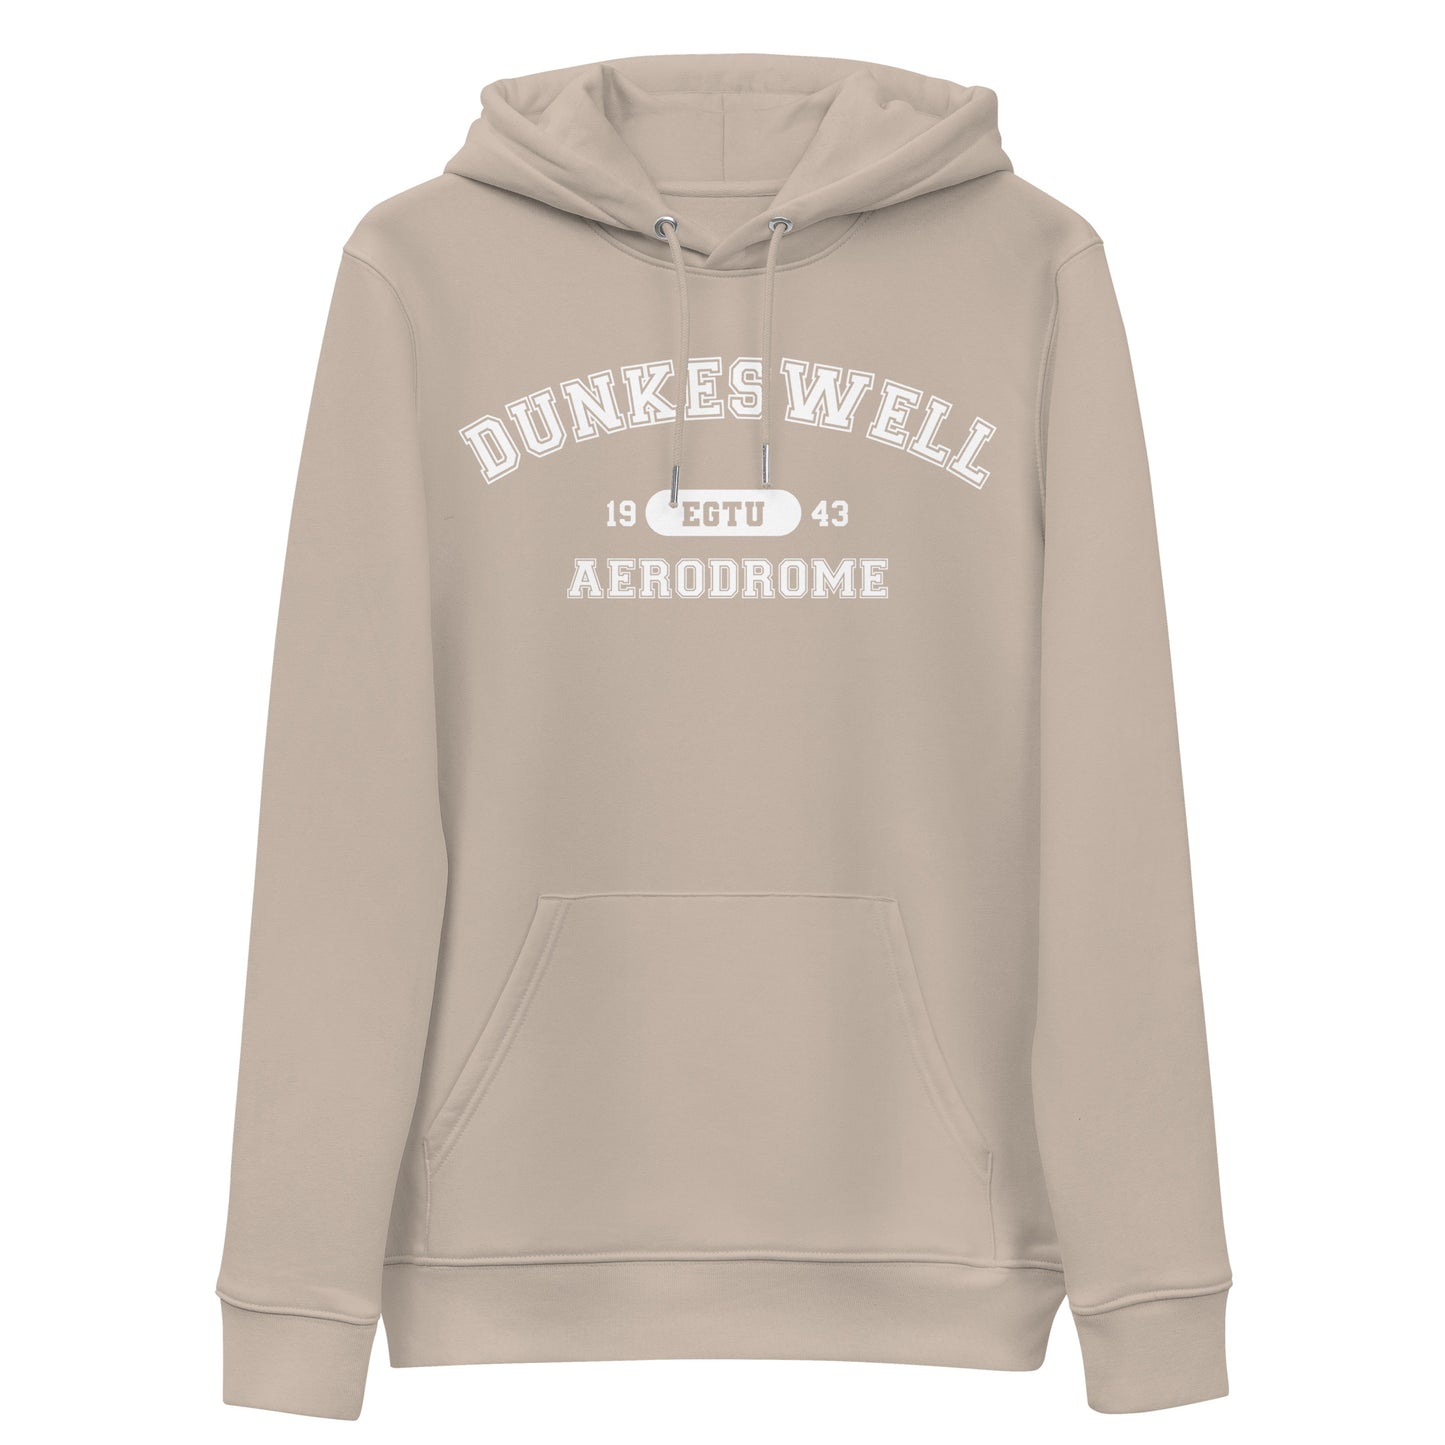 Dunkeswell Aerodrome with ICAO code in collegiate style. Unisex essential eco hoodie.